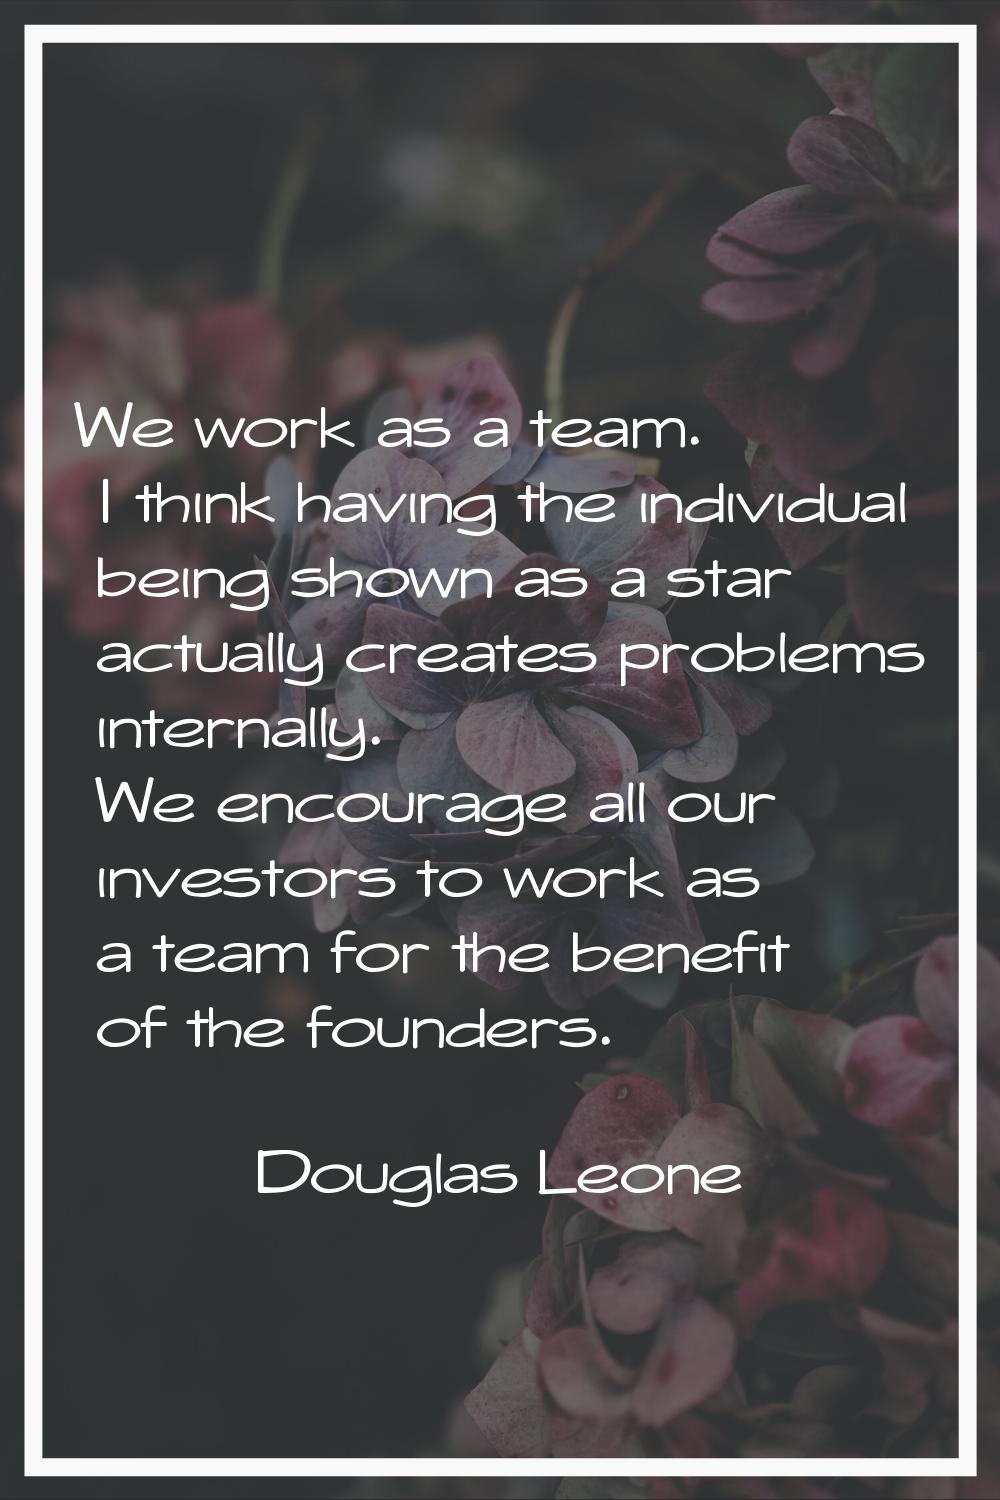 We work as a team. I think having the individual being shown as a star actually creates problems in